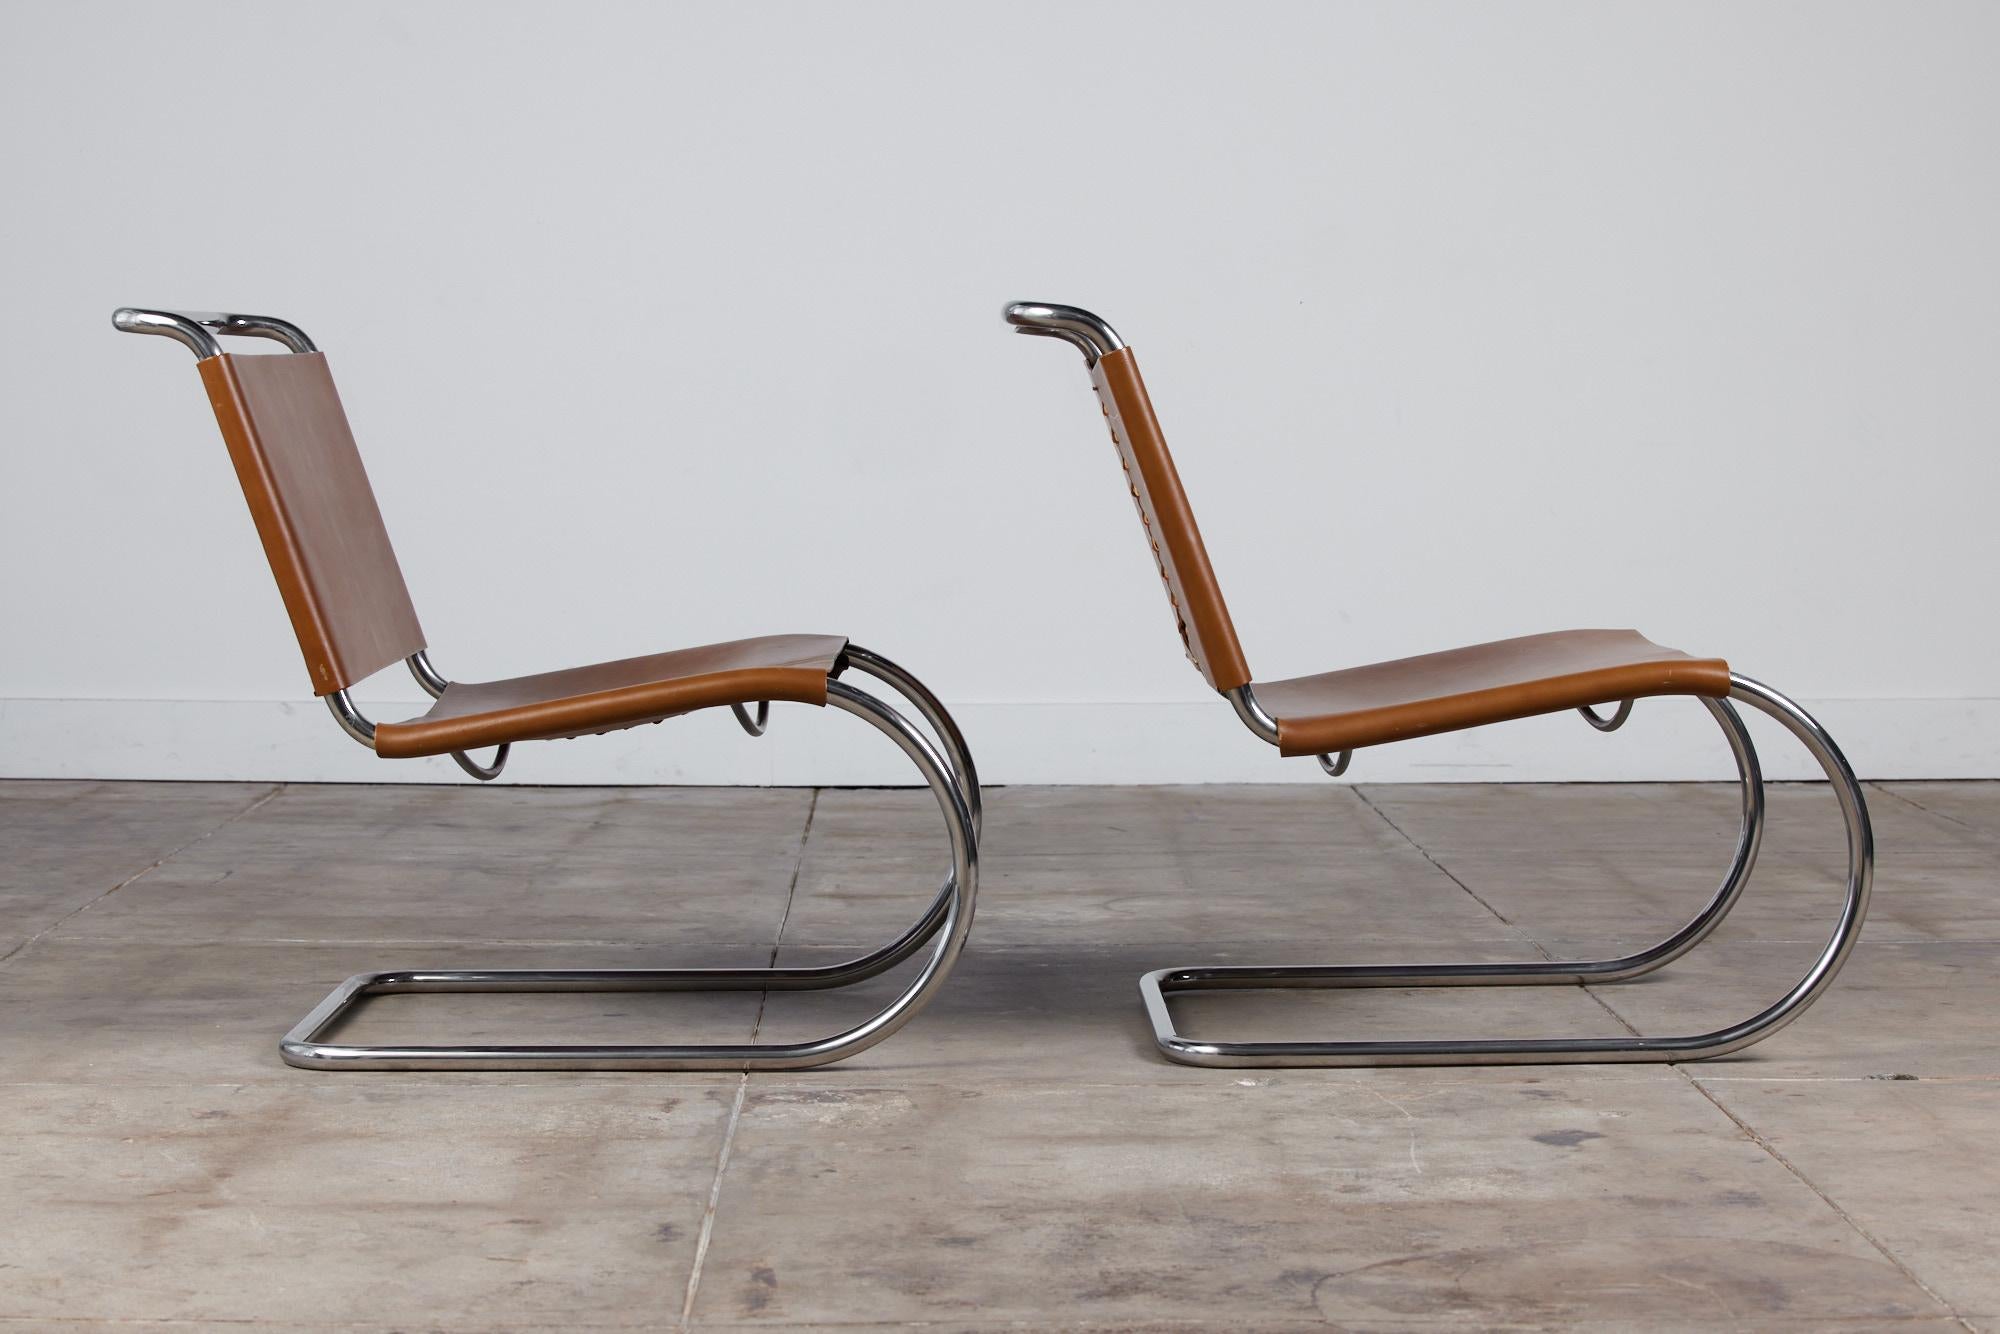 Steel Pair of Mies van der Rohe Leather Lounge Chairs for Knoll